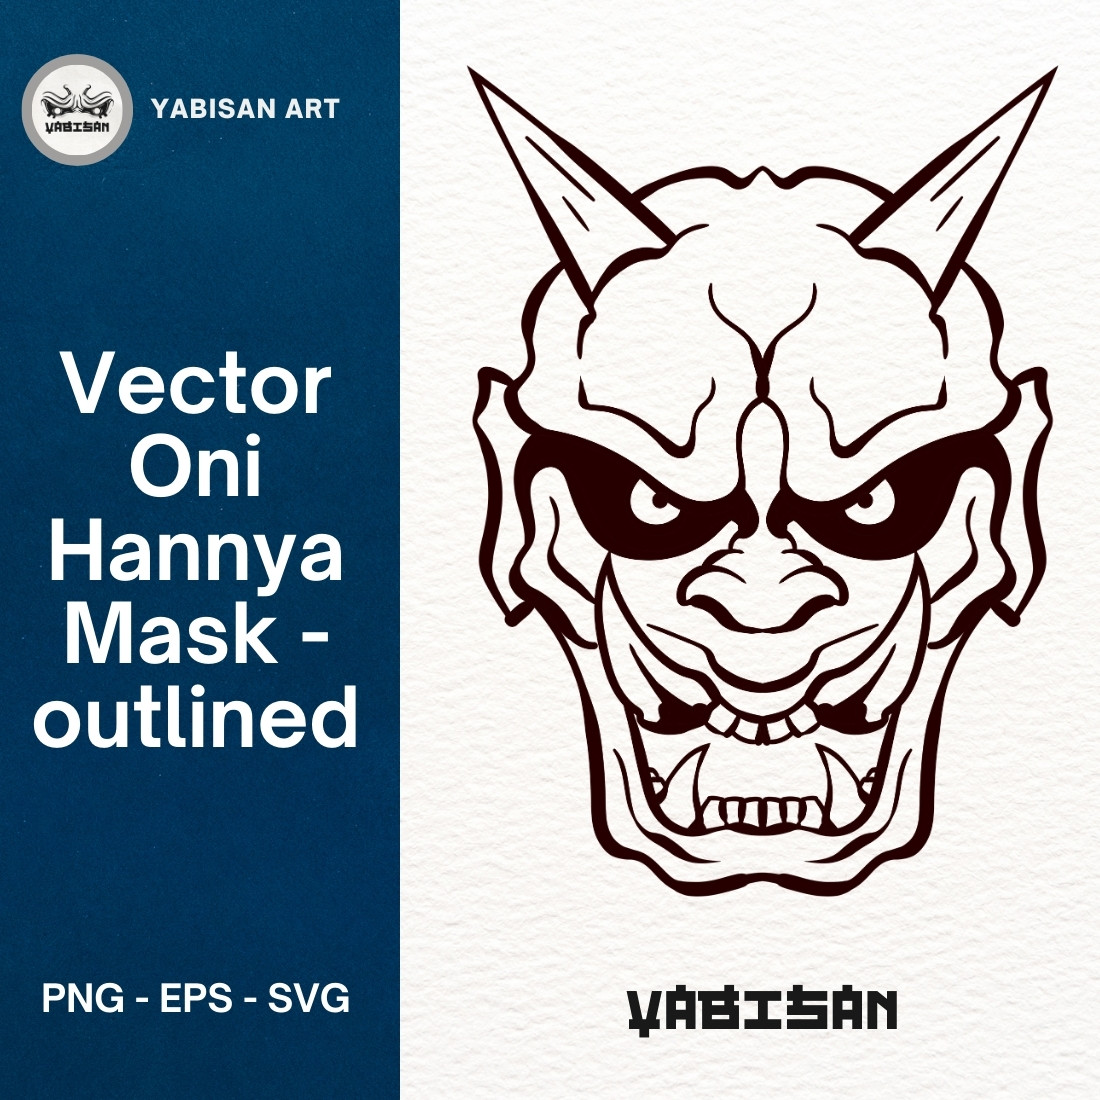 Oni Hannya Mask art 1 - outlined preview image.